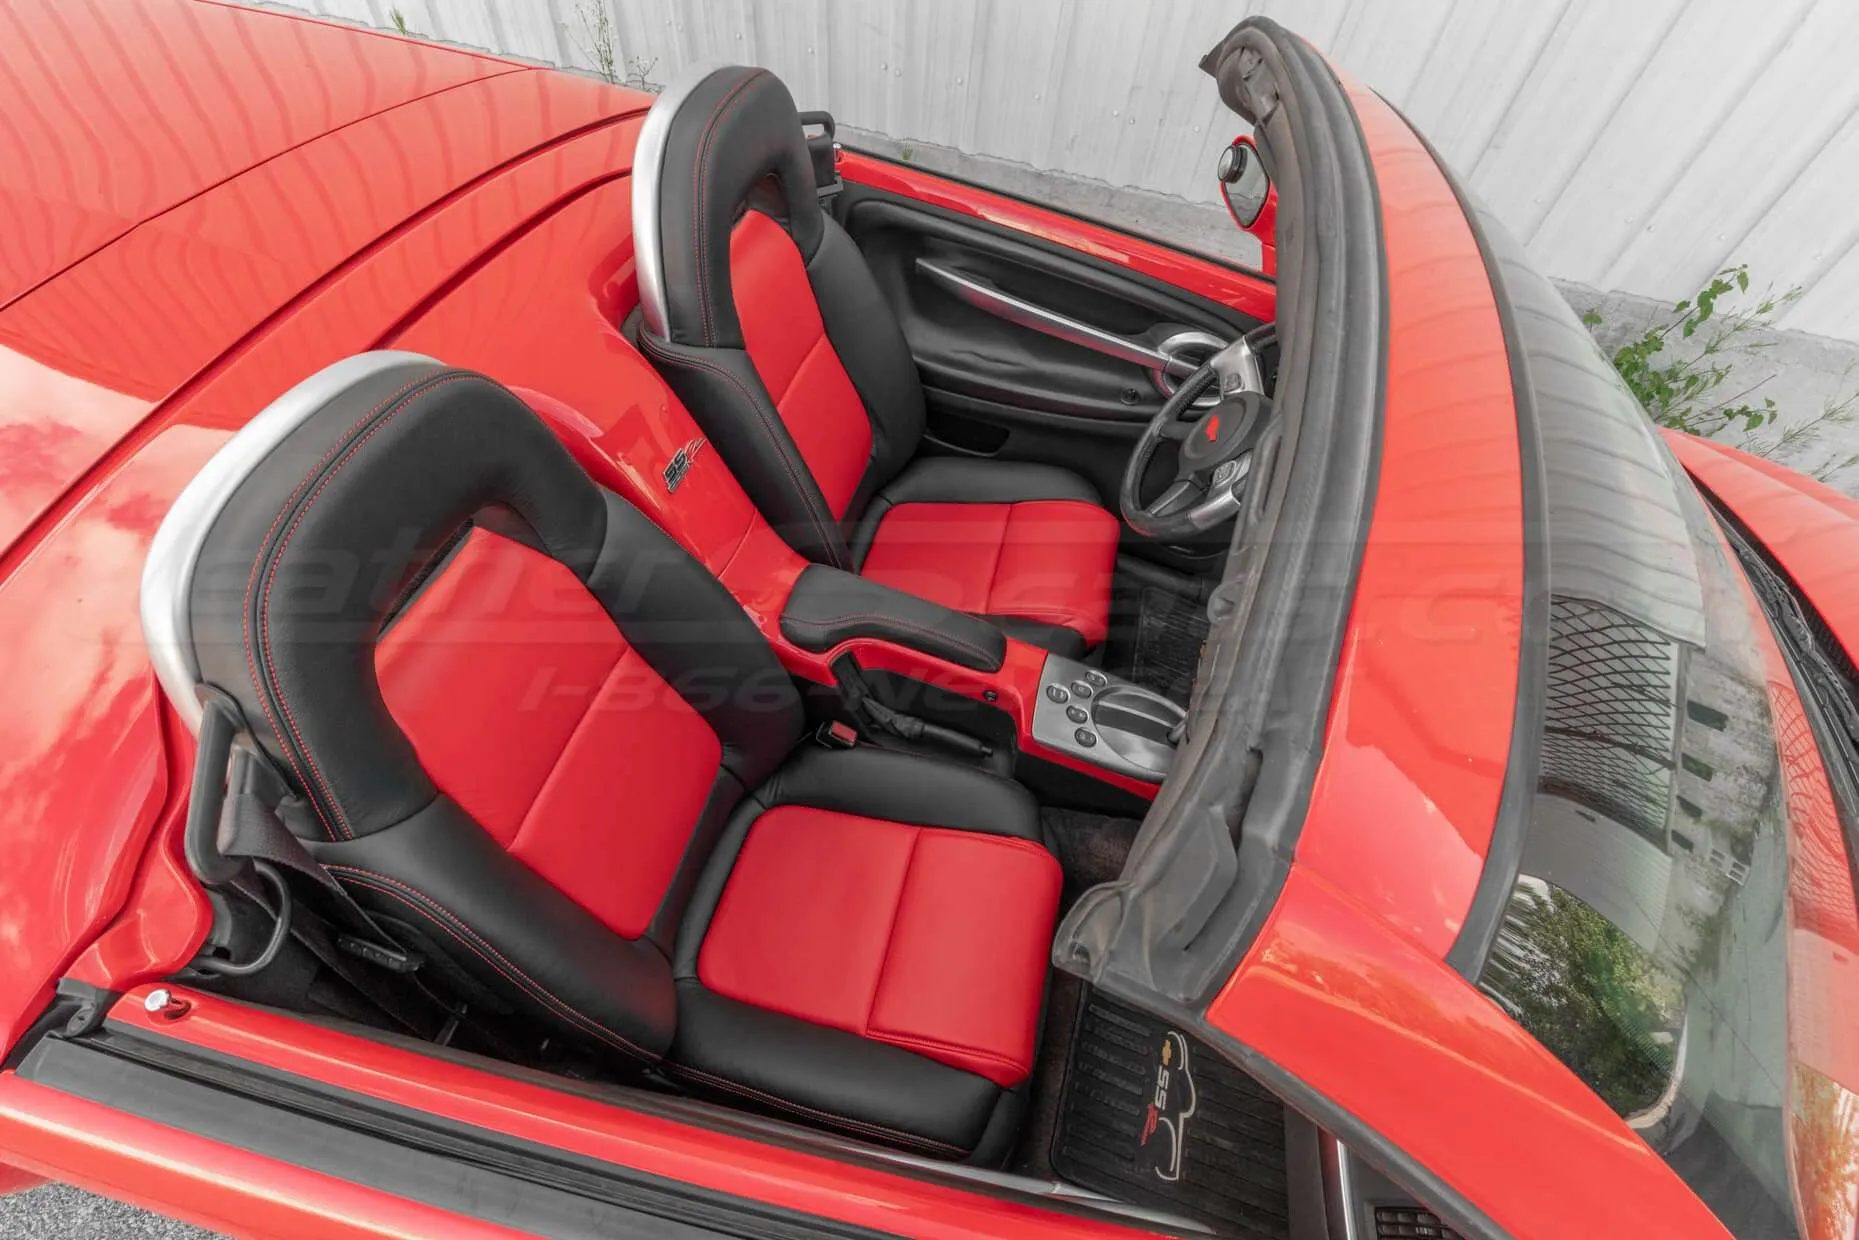 Top-down view from passenger sides on SSR with leather interior